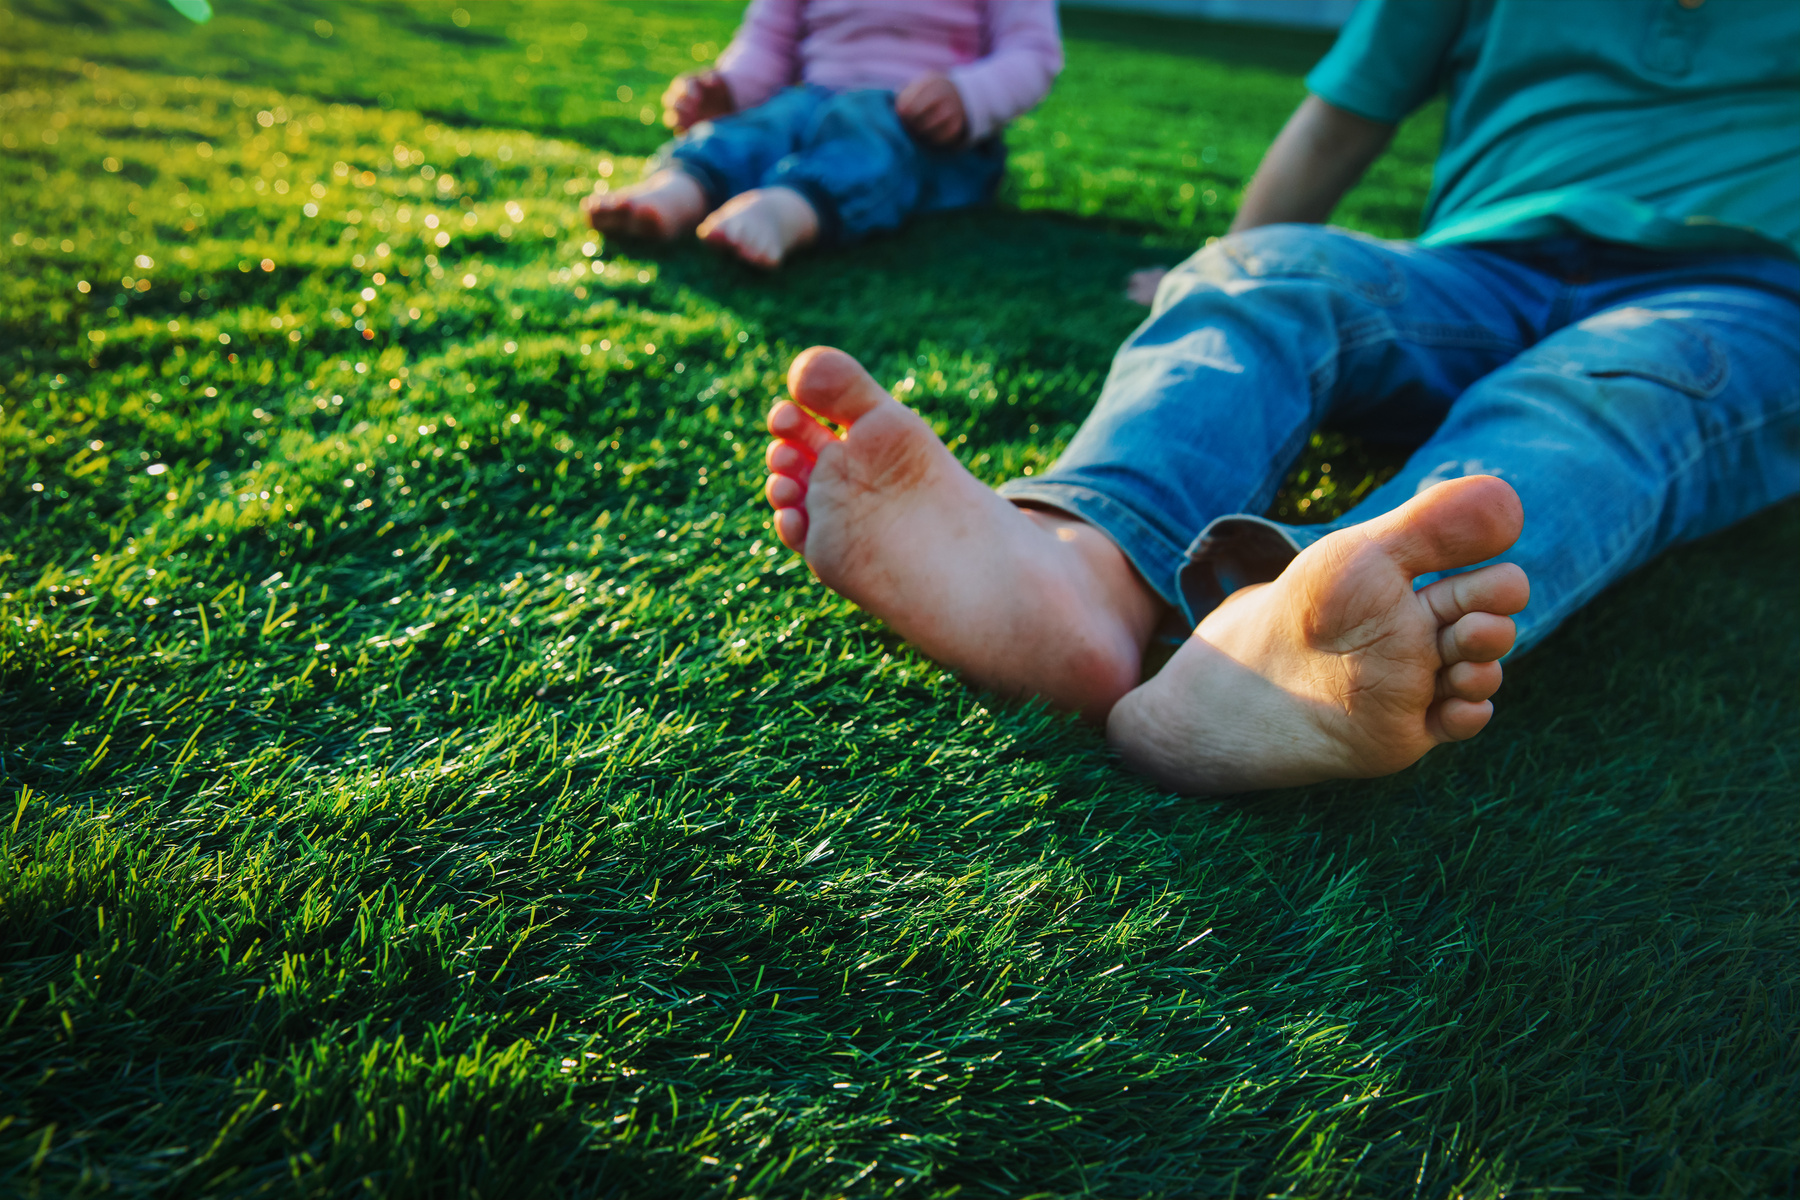 kids play barefoot on grass at sunset nature